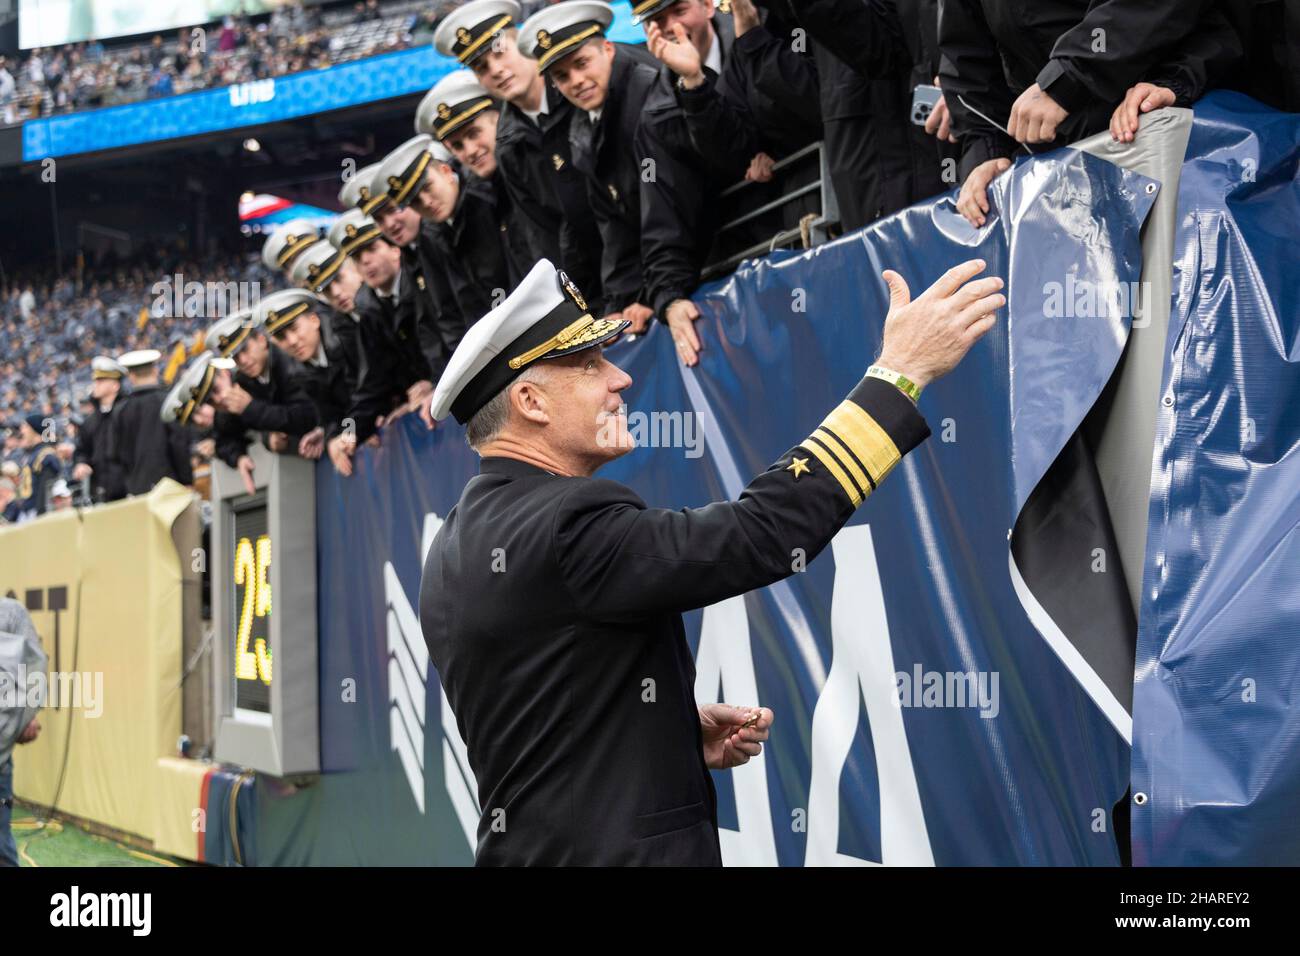 East Rutherford, United States of America. 11 December, 2021. U.S. Naval Academy superintendent, Vice Adm. Sean Buck, greets midshipman in the stands during the annual Army-Navy football game at Metlife Stadium December 11, 2021 in East Rutherford, New Jersey. The U.S. Naval Academy Midshipmen defeated the Army Black Knights 17-13 in their 122nd matchup.  Credit: Stacy Godfrey/DOD/Alamy Live News Stock Photo